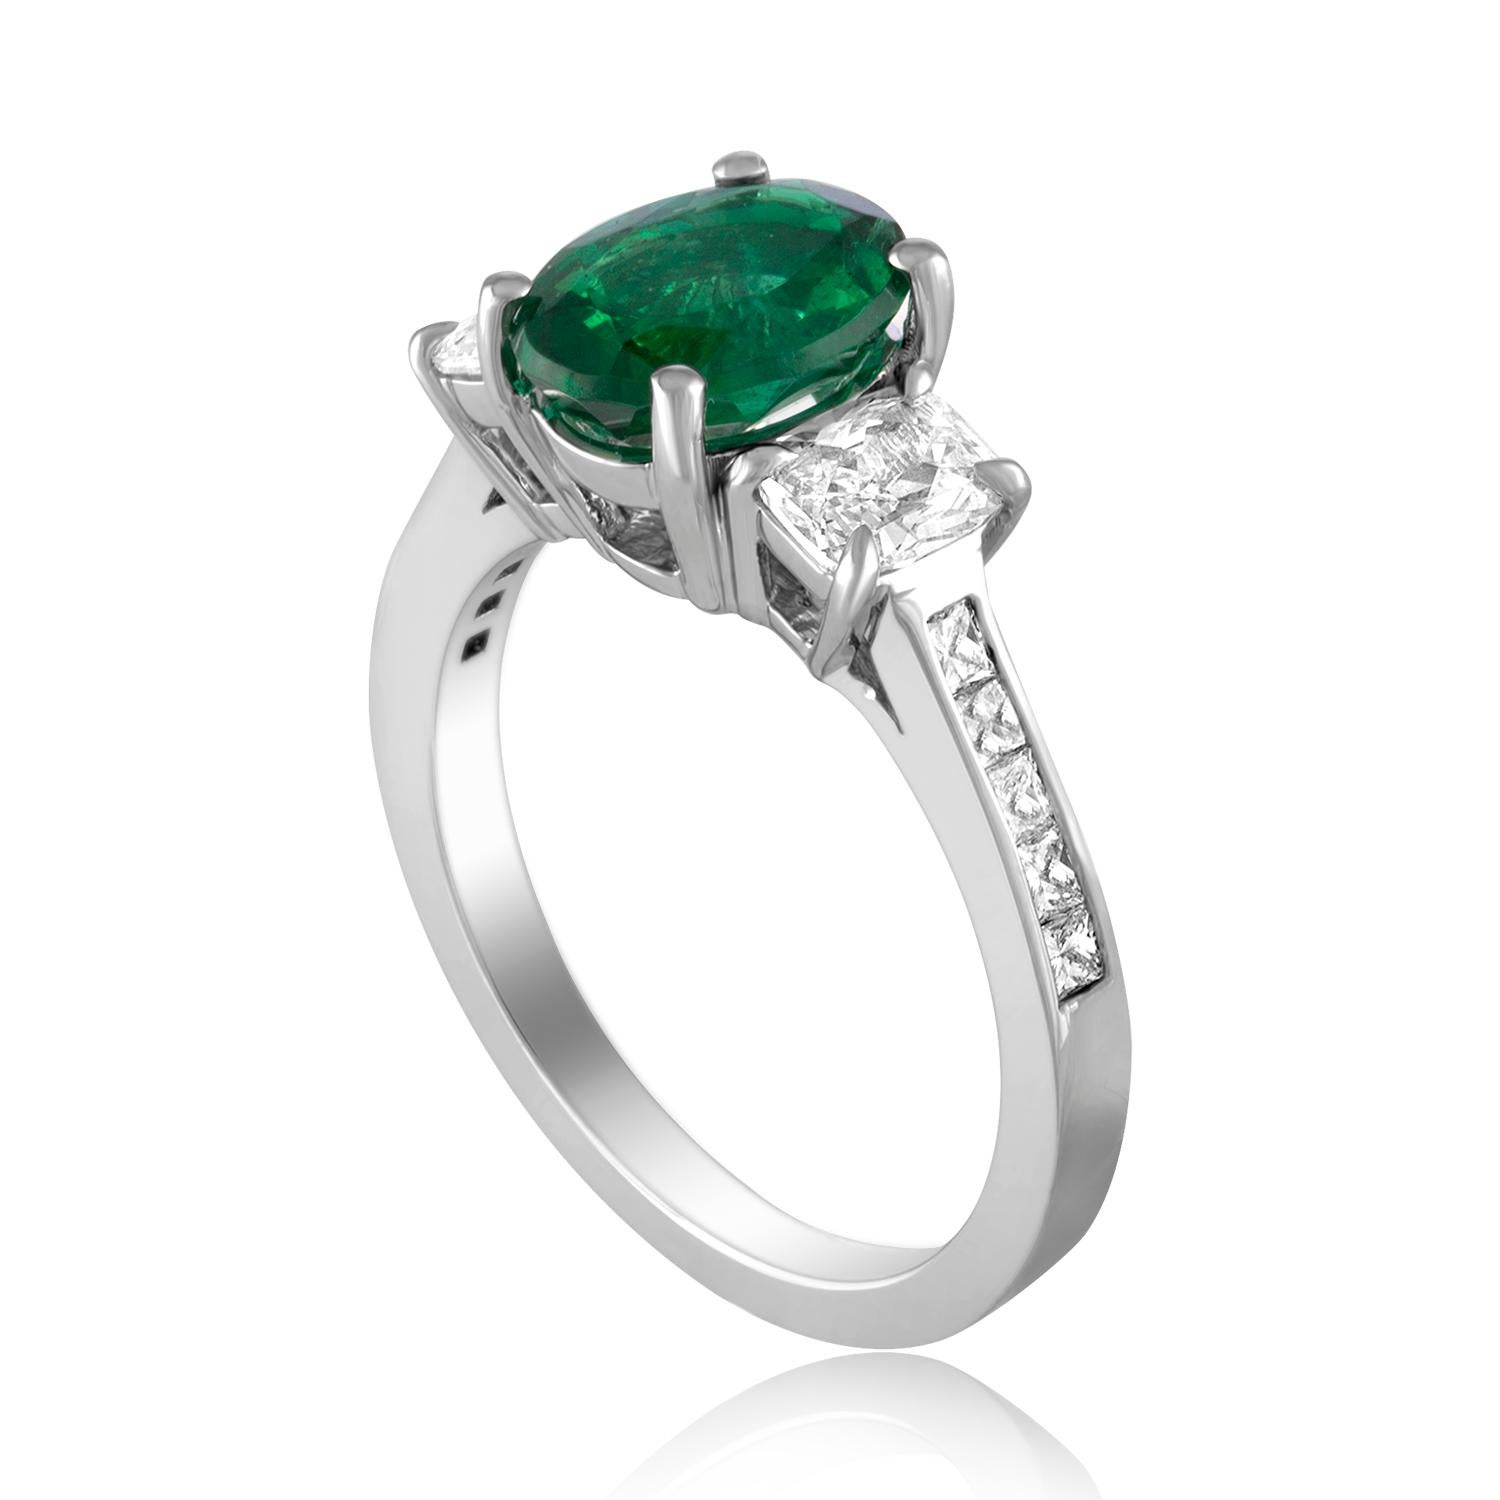 Beautiful Three Stone Emerald Ring
The ring is 18K White Gold.
There are 2 side stones 0.62 Carats Diamonds F VS
The Band has small princess cut diamonds 0.23 Carats F VS
The Center is a beautiful oval 1.55 Carat Emerald.
The Emerald is AGL